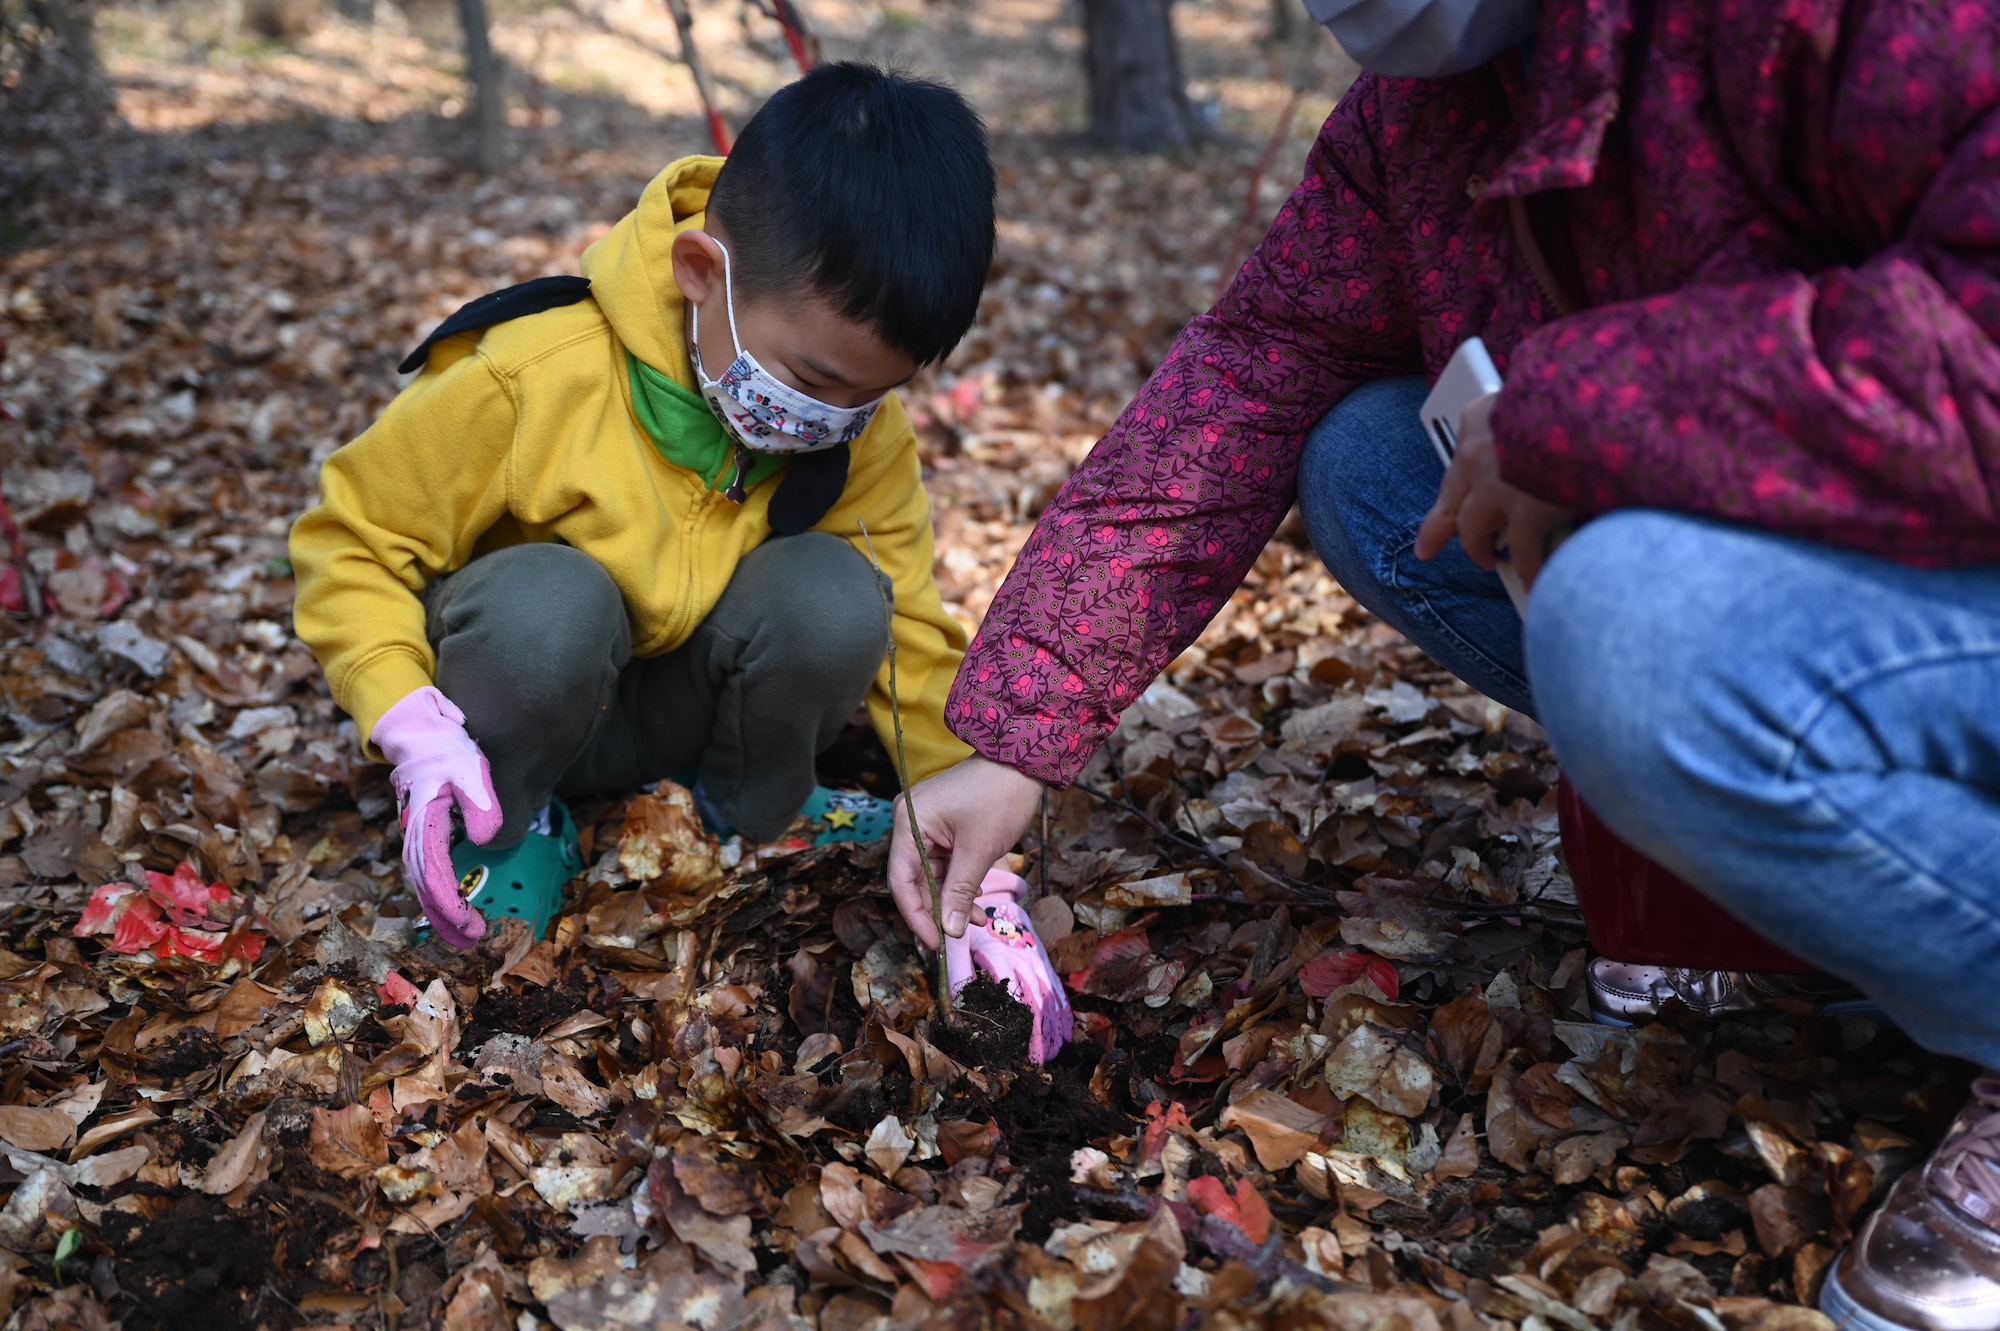 Bryce Ko (left) and Ujin Ko, U.S. Army spouse, plant an oak tree during Earth Day at Ramstein Air Base